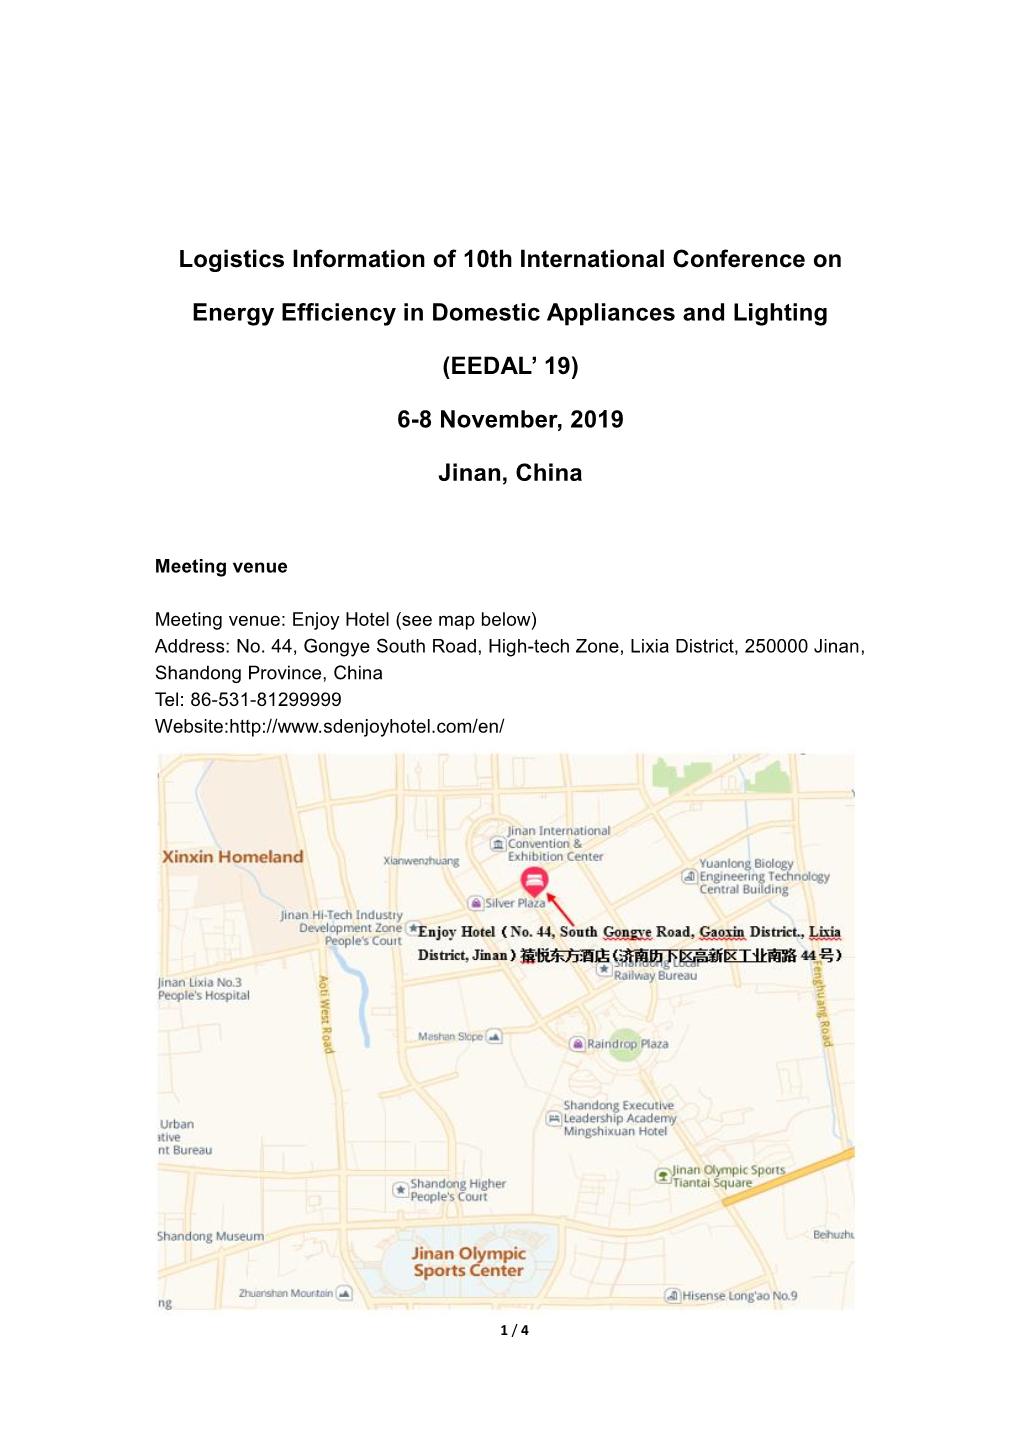 Logistics Information of 10Th International Conference on Energy Efficiency in Domestic Appliances and Lighting (EEDAL' 19) 6